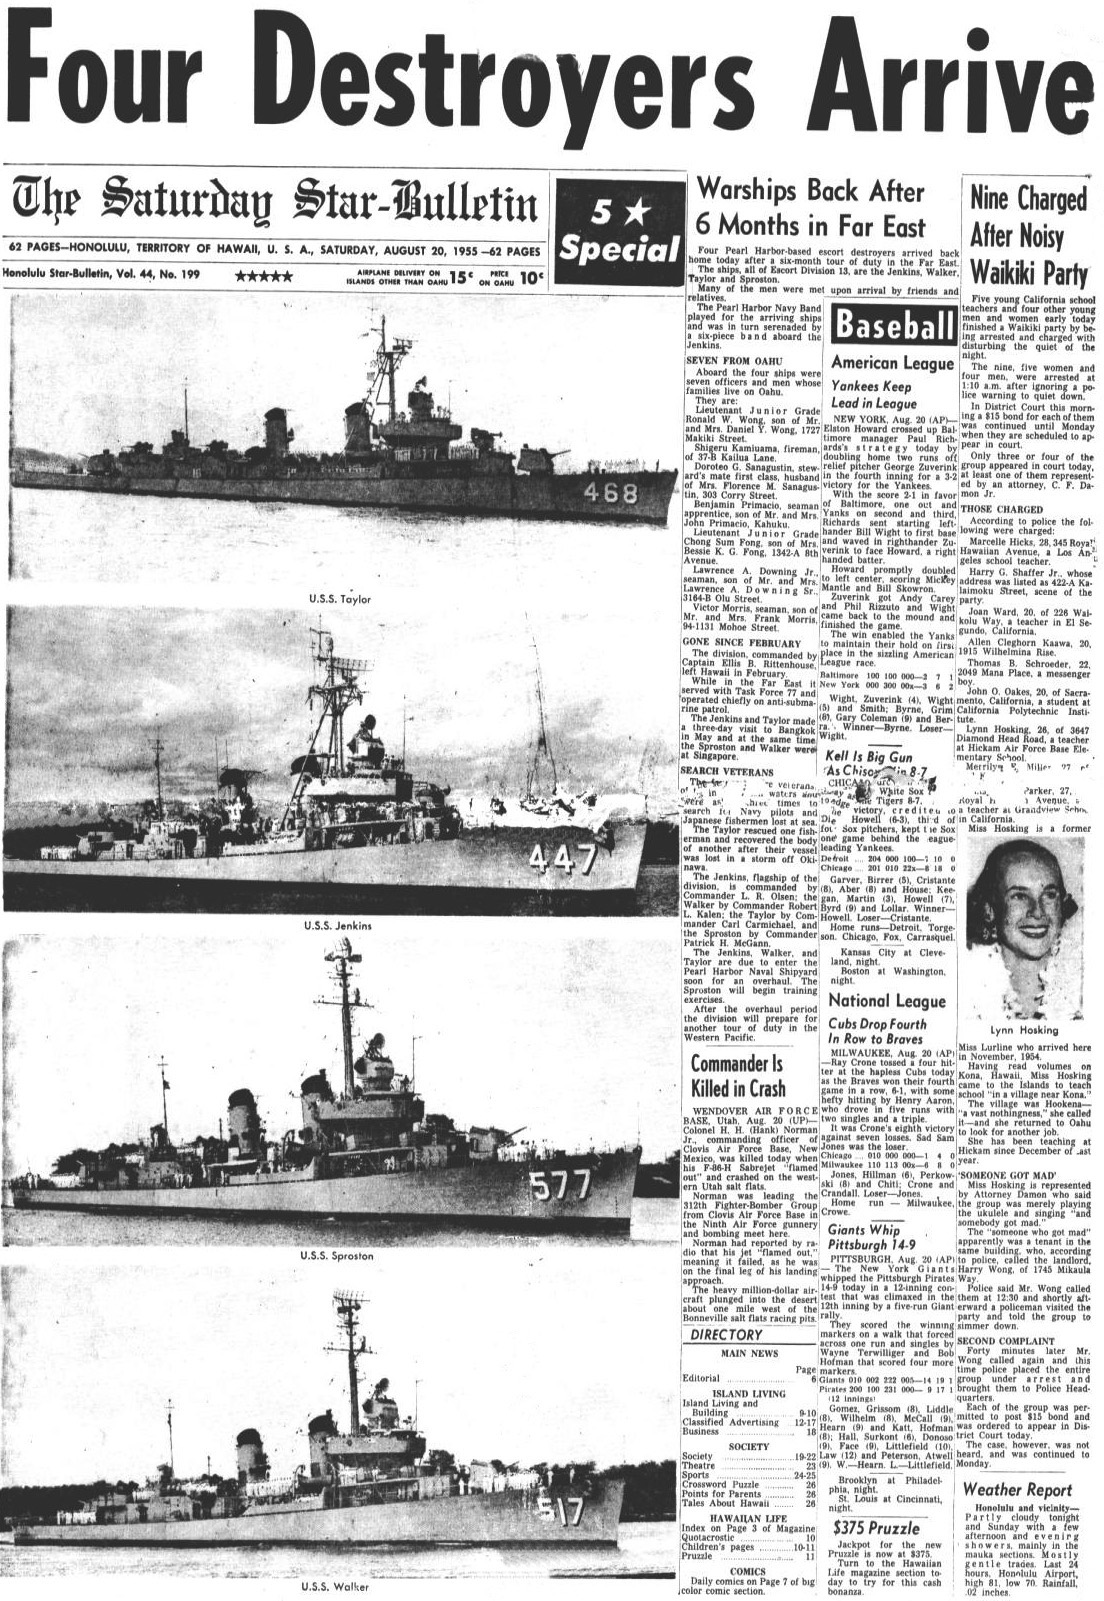 "Four Destroyers Arrive." Article from the The Saturday Star-Bulletin - Saturday, August 20, 1955.